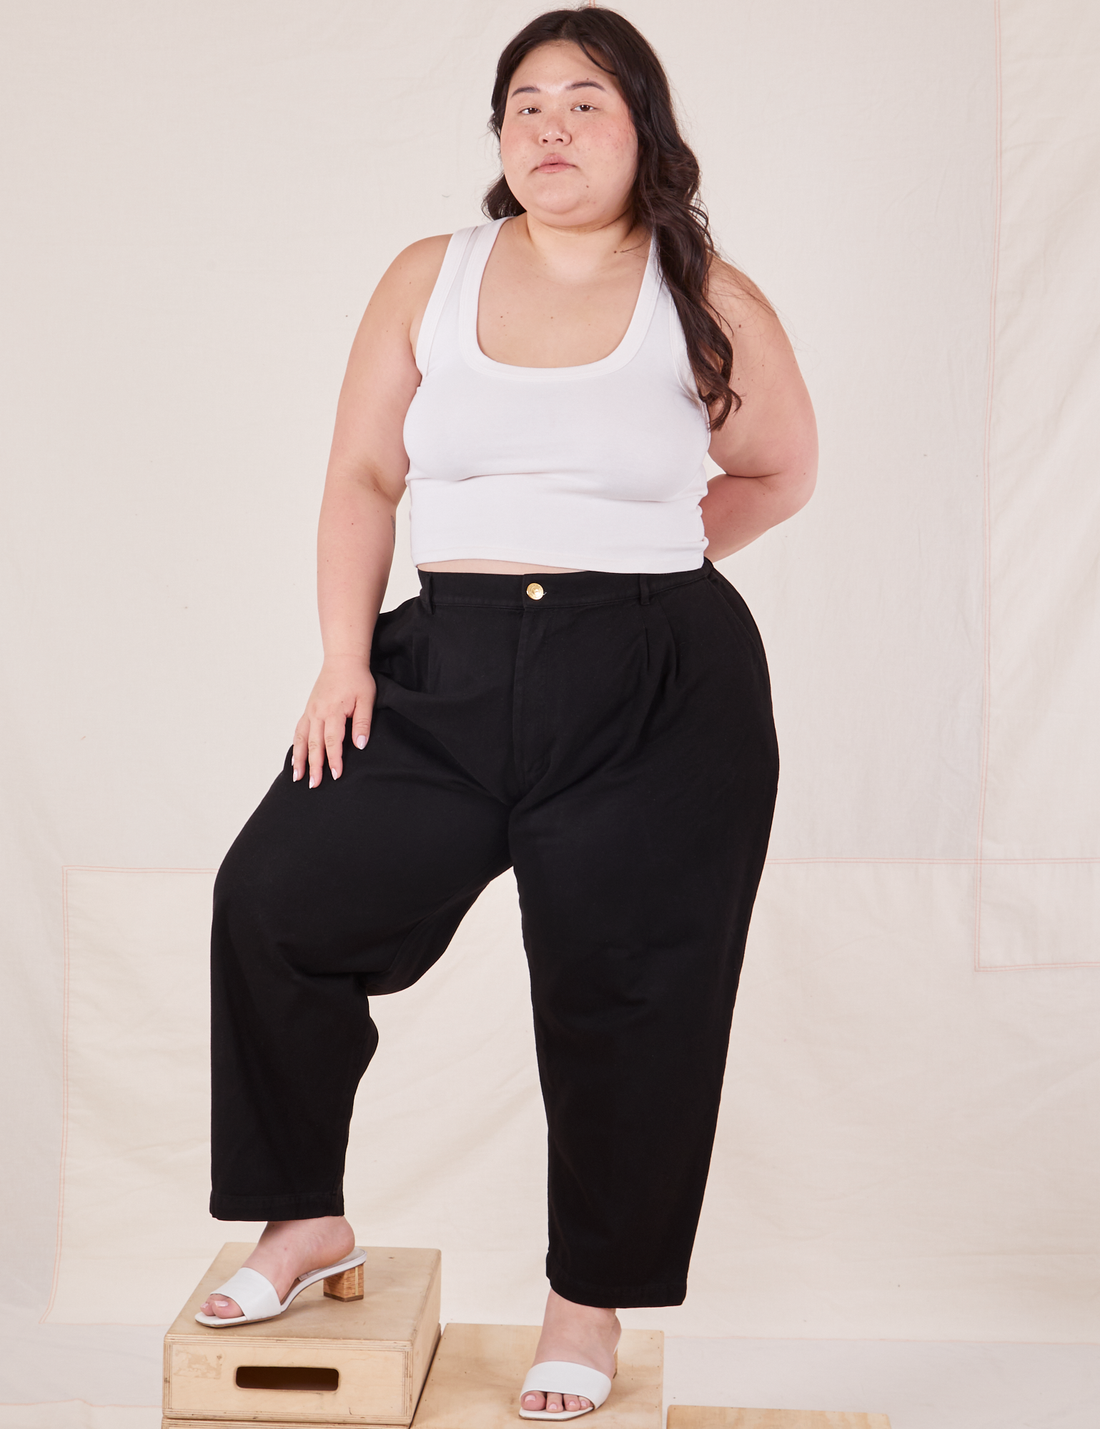 Ashley is 5'7" and wearing 1XL Petite Organic Trousers in Basic Black paired with vintage off-white Cropped Tank Top